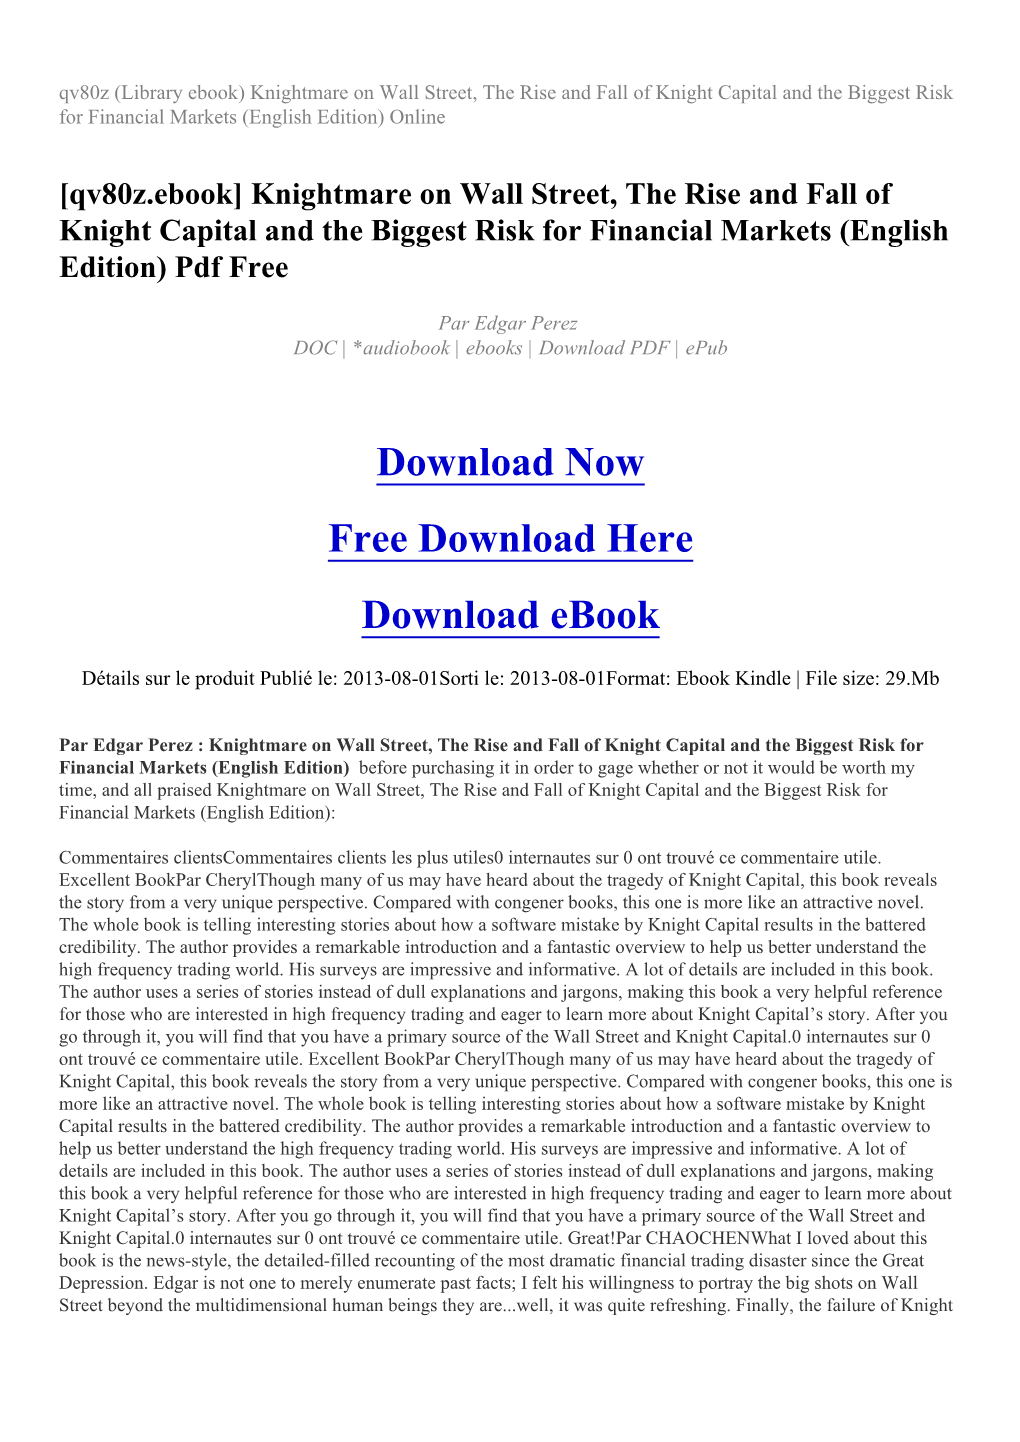 Knightmare on Wall Street, the Rise and Fall of Knight Capital and the Biggest Risk for Financial Markets (English Edition) Online